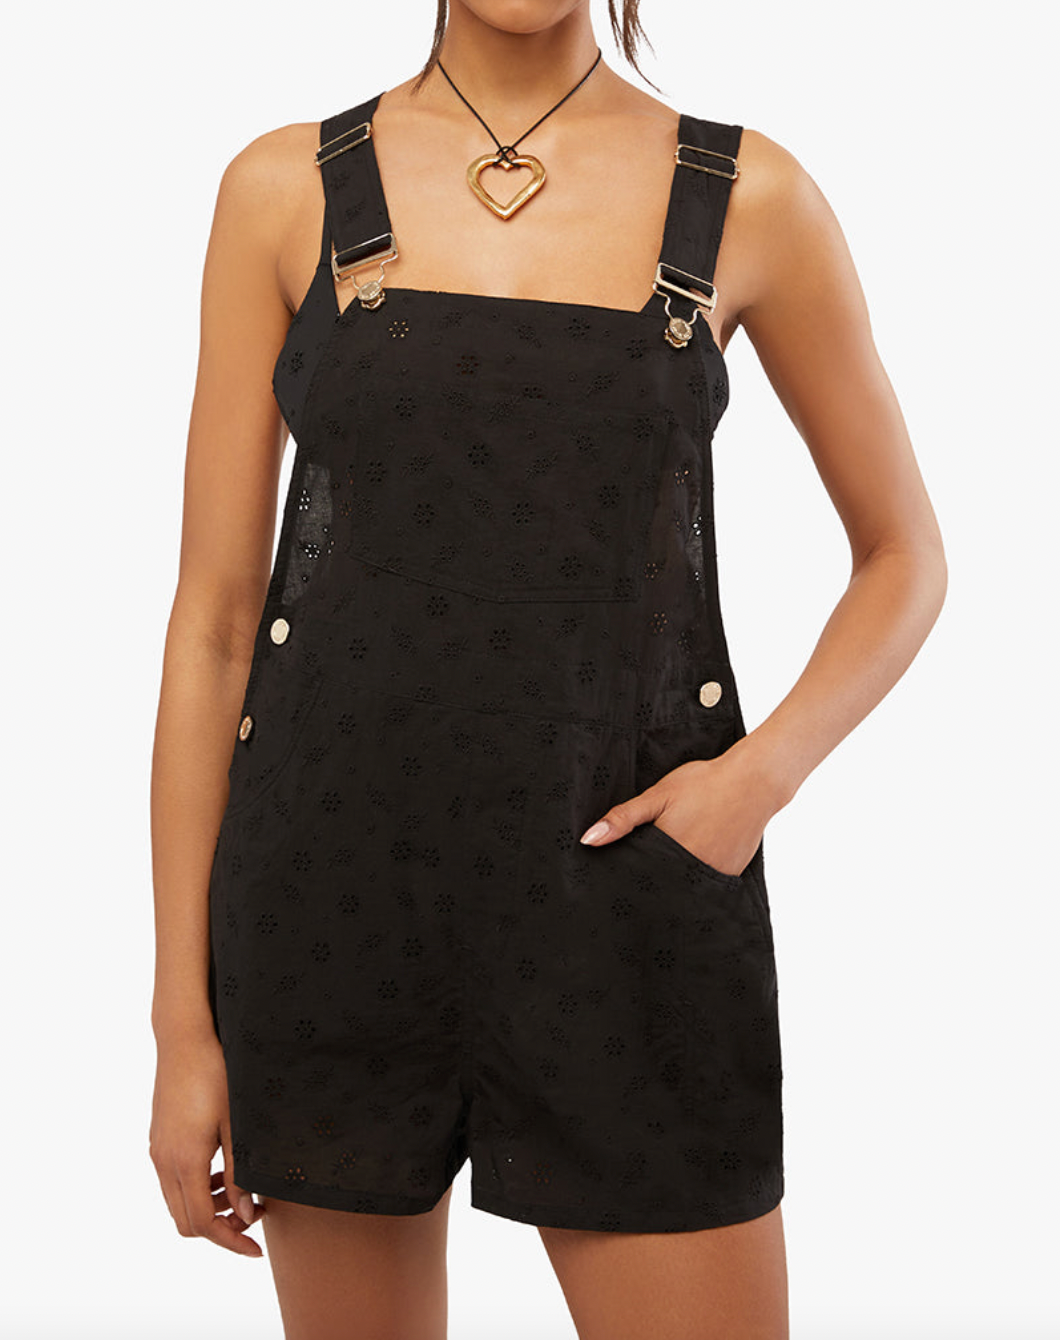 Basic Short Eyelet Overall Black, Romper Dress by Onia | LIT Boutique